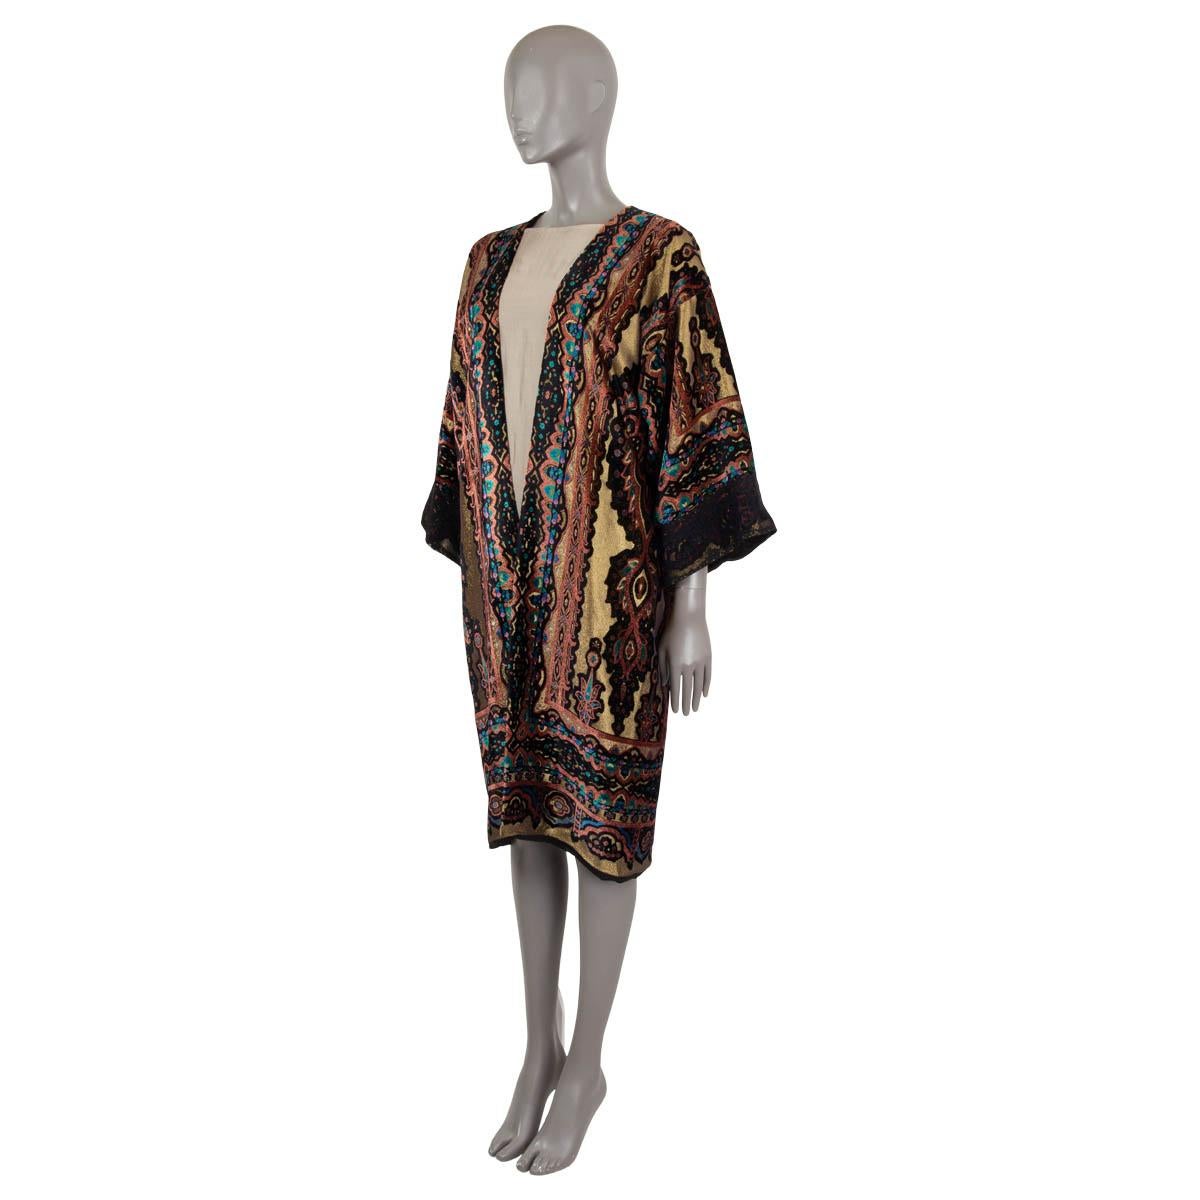 100% authentic Etro open topper coat in black, turquoise, rust, blue and purple velvet viscose (62%), silk (19%) and polyester (10%) with golden lurex (9%).The design features drop shoulders and wide sleeves embellished with black lace trim on the